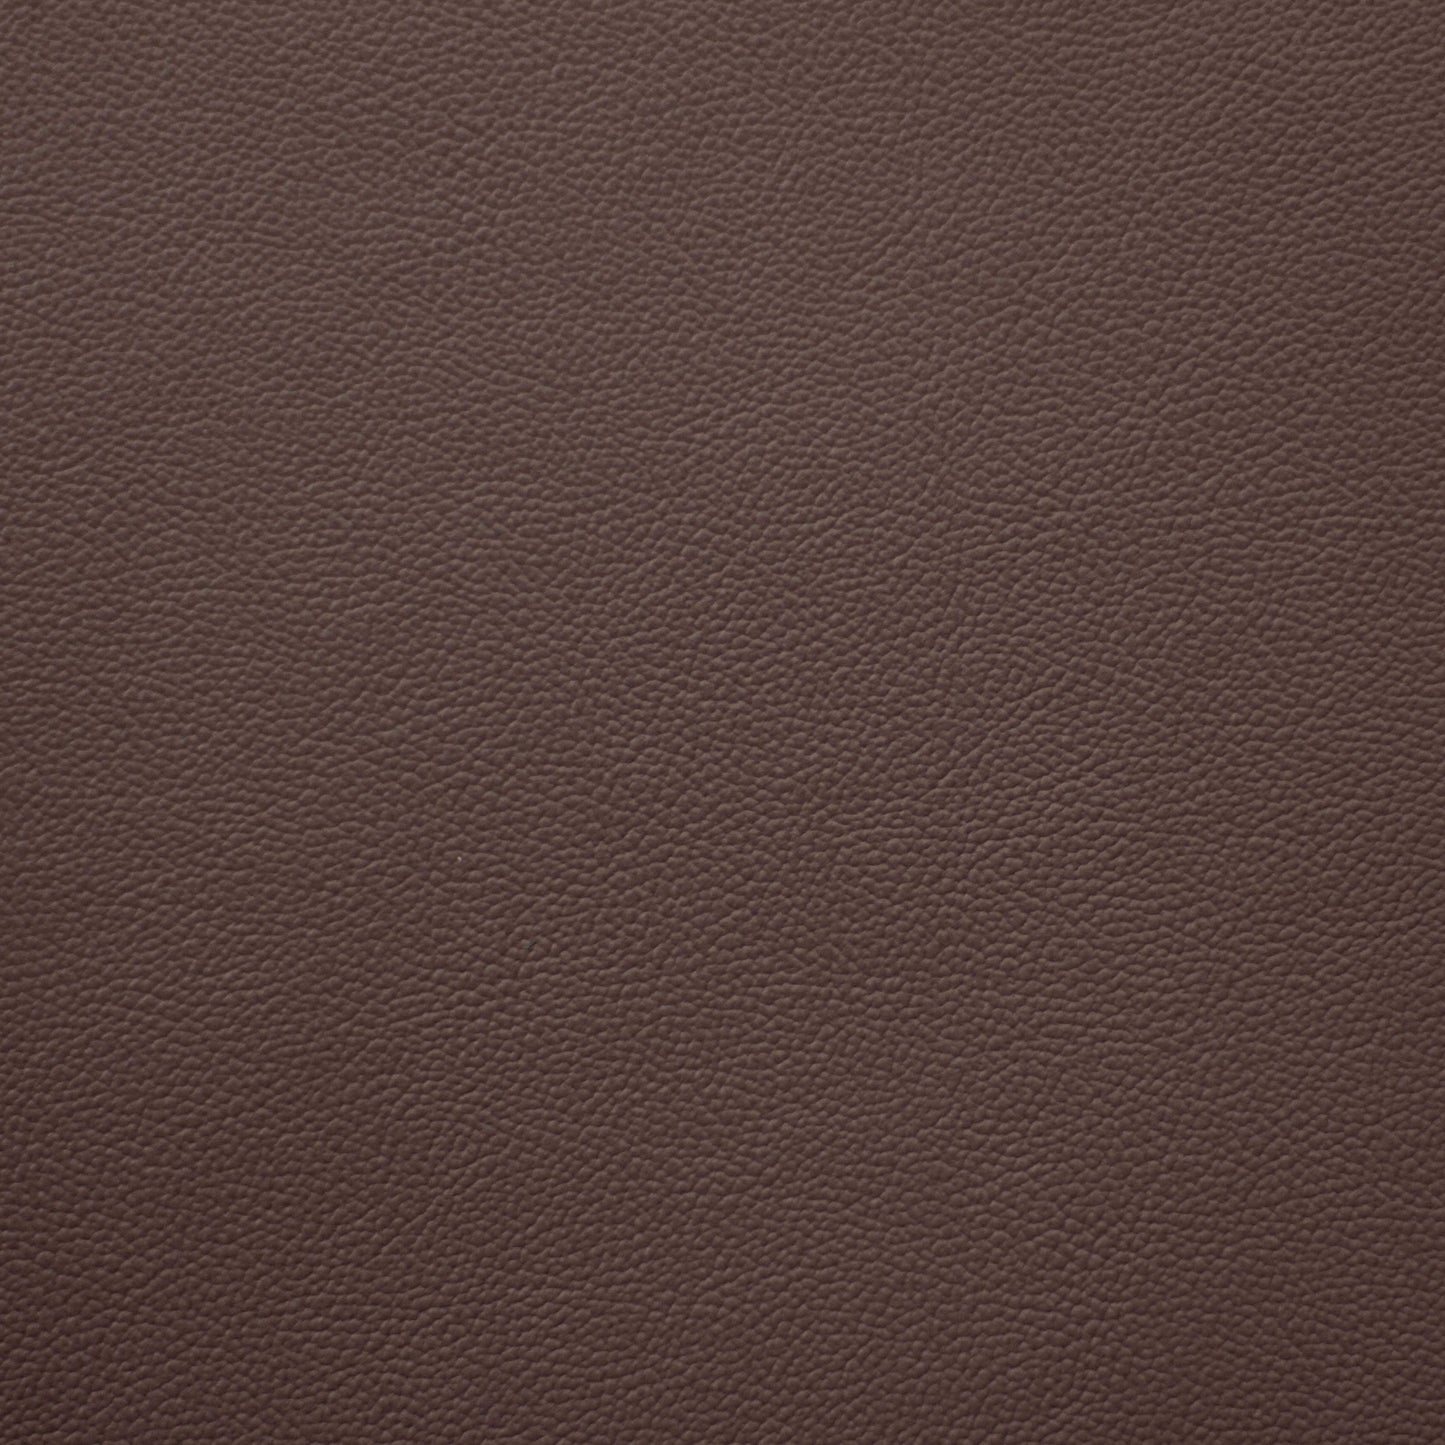 Empire, Palisade, Iconic® Antimicrobial & Cleanable, Hospitality Leather Hide